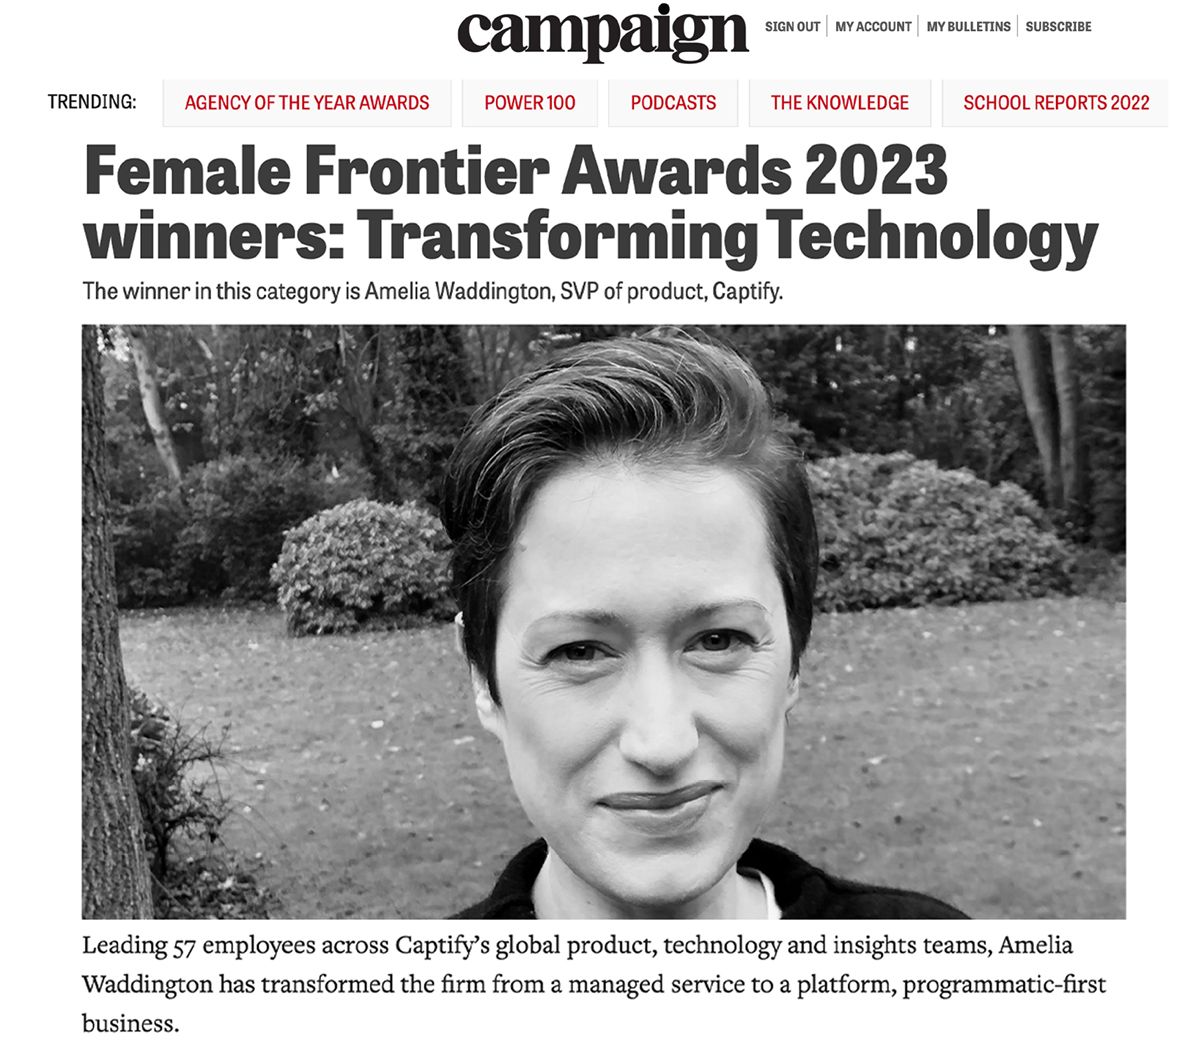 Campaign: Female Frontier Awards 2023 Winners—Transforming Technology